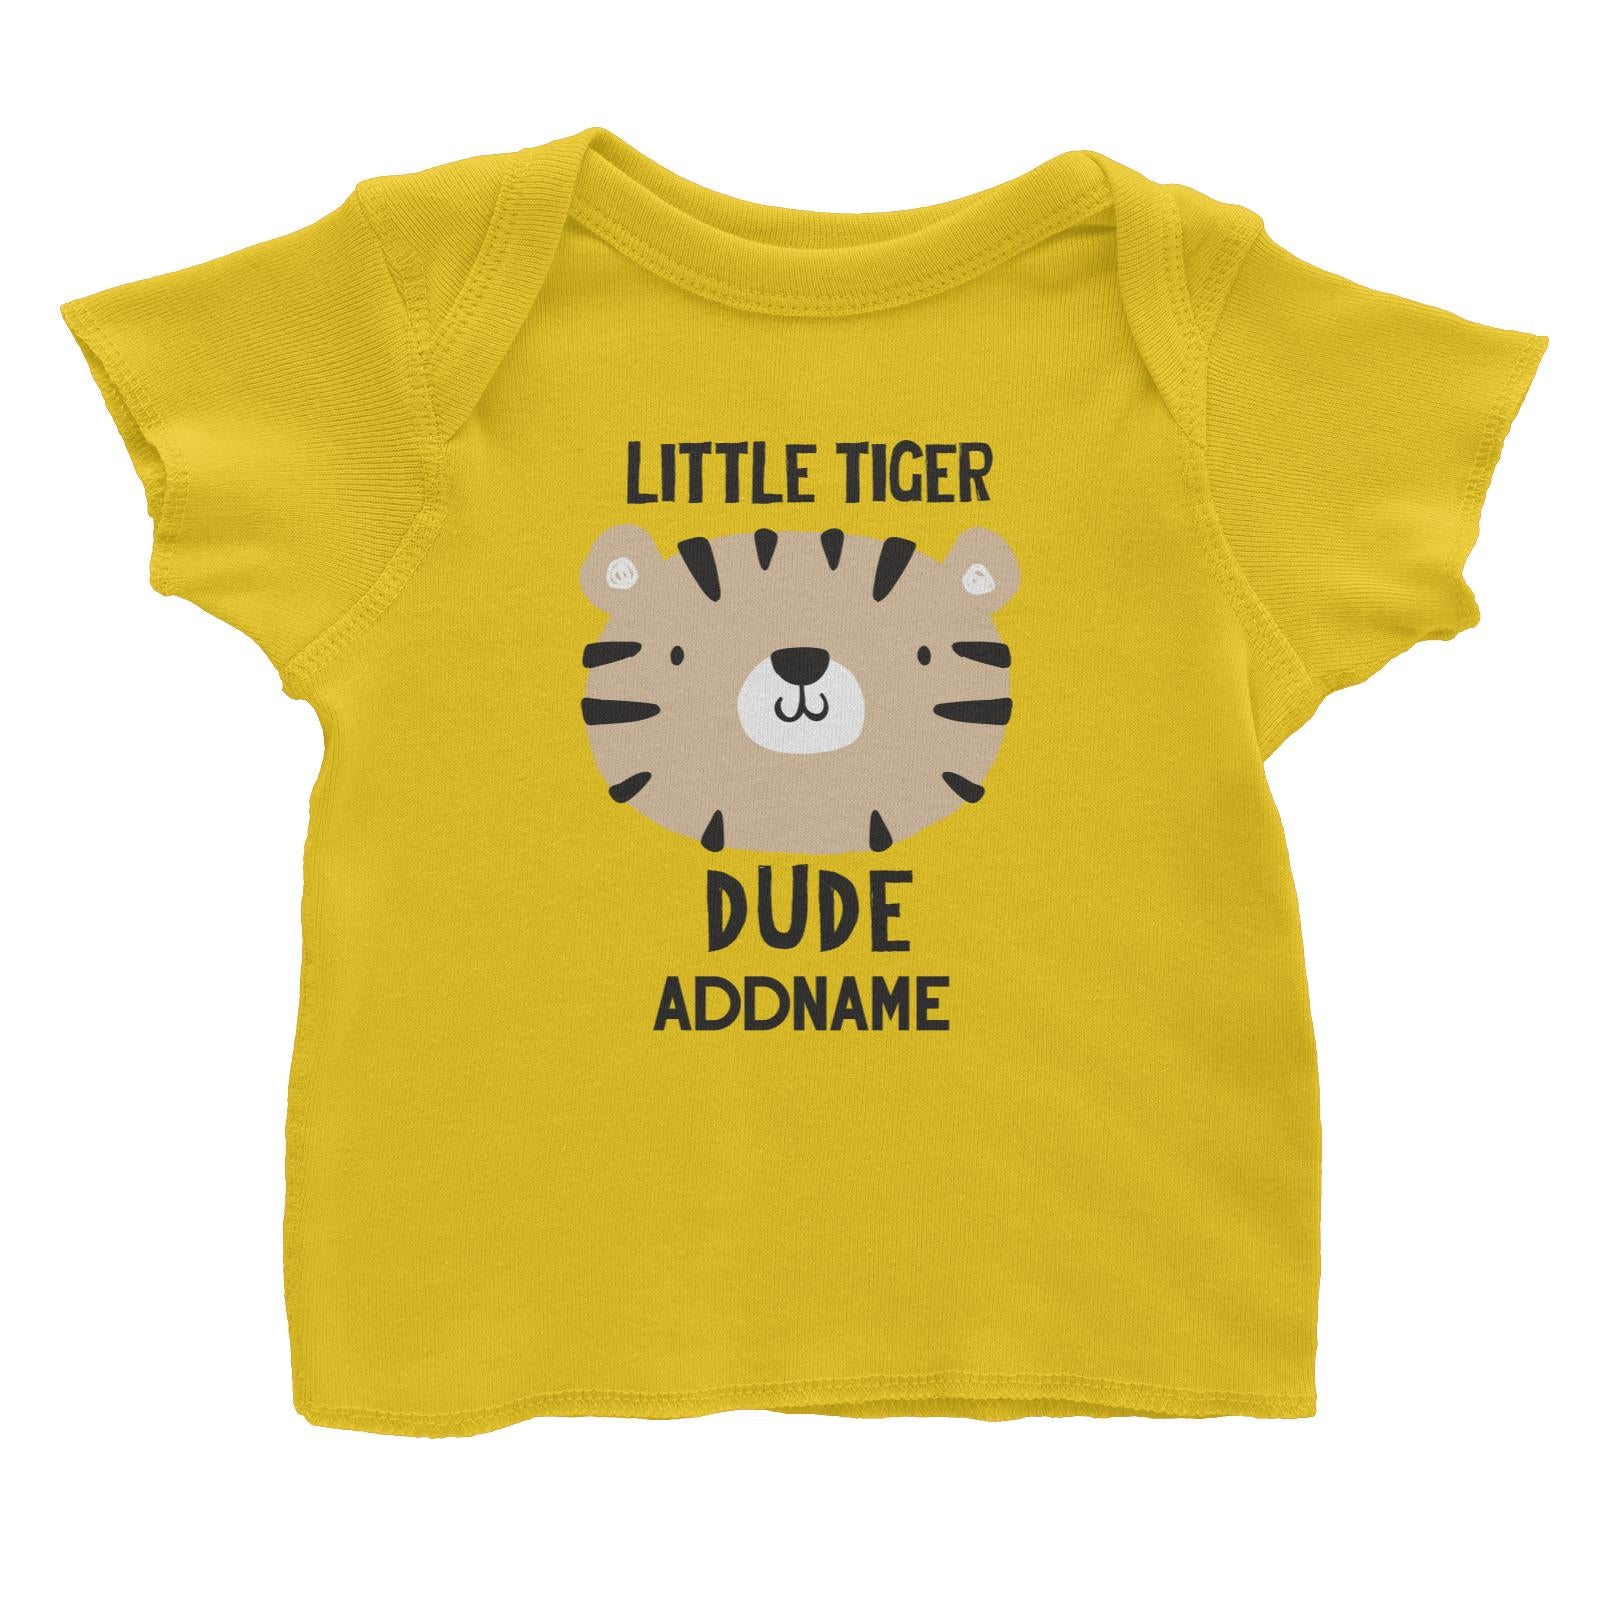 Little Tiger Dude Addname Baby T-Shirt